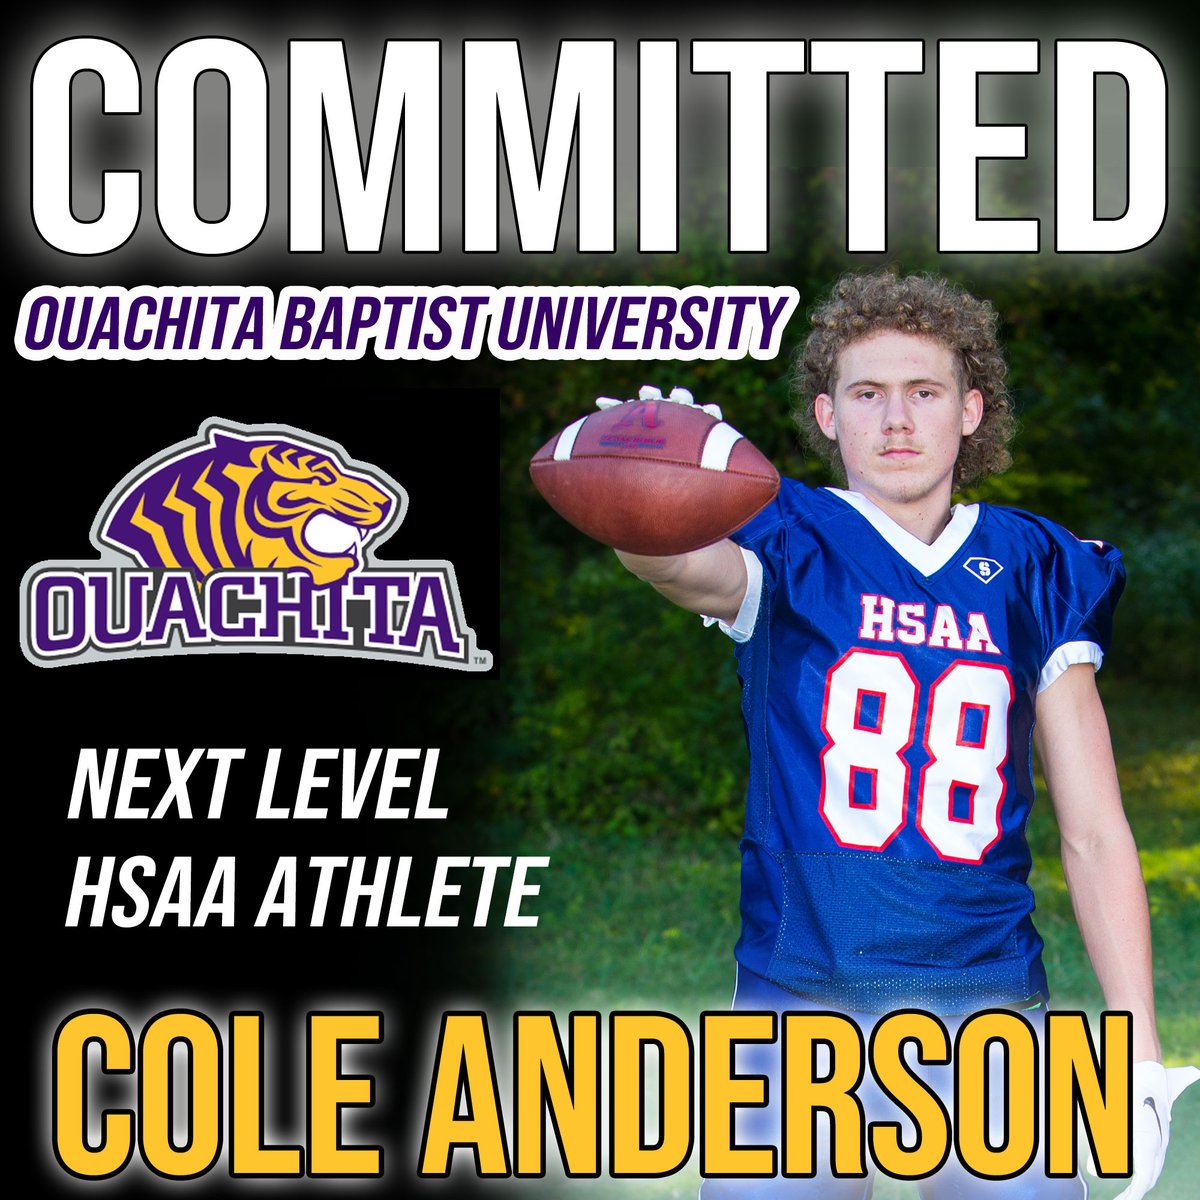 Congratulations to Cole Anderson for his commitment to continuing his academic and football career at Ouachita Baptist University! 

#COMMITTED @OuachitaFB 
#HSAAfootball #homeschoolfootball  
#txhsfootball #txhsfb  @texashsfootball @TXPrivateFBGuy @NTXHSFB